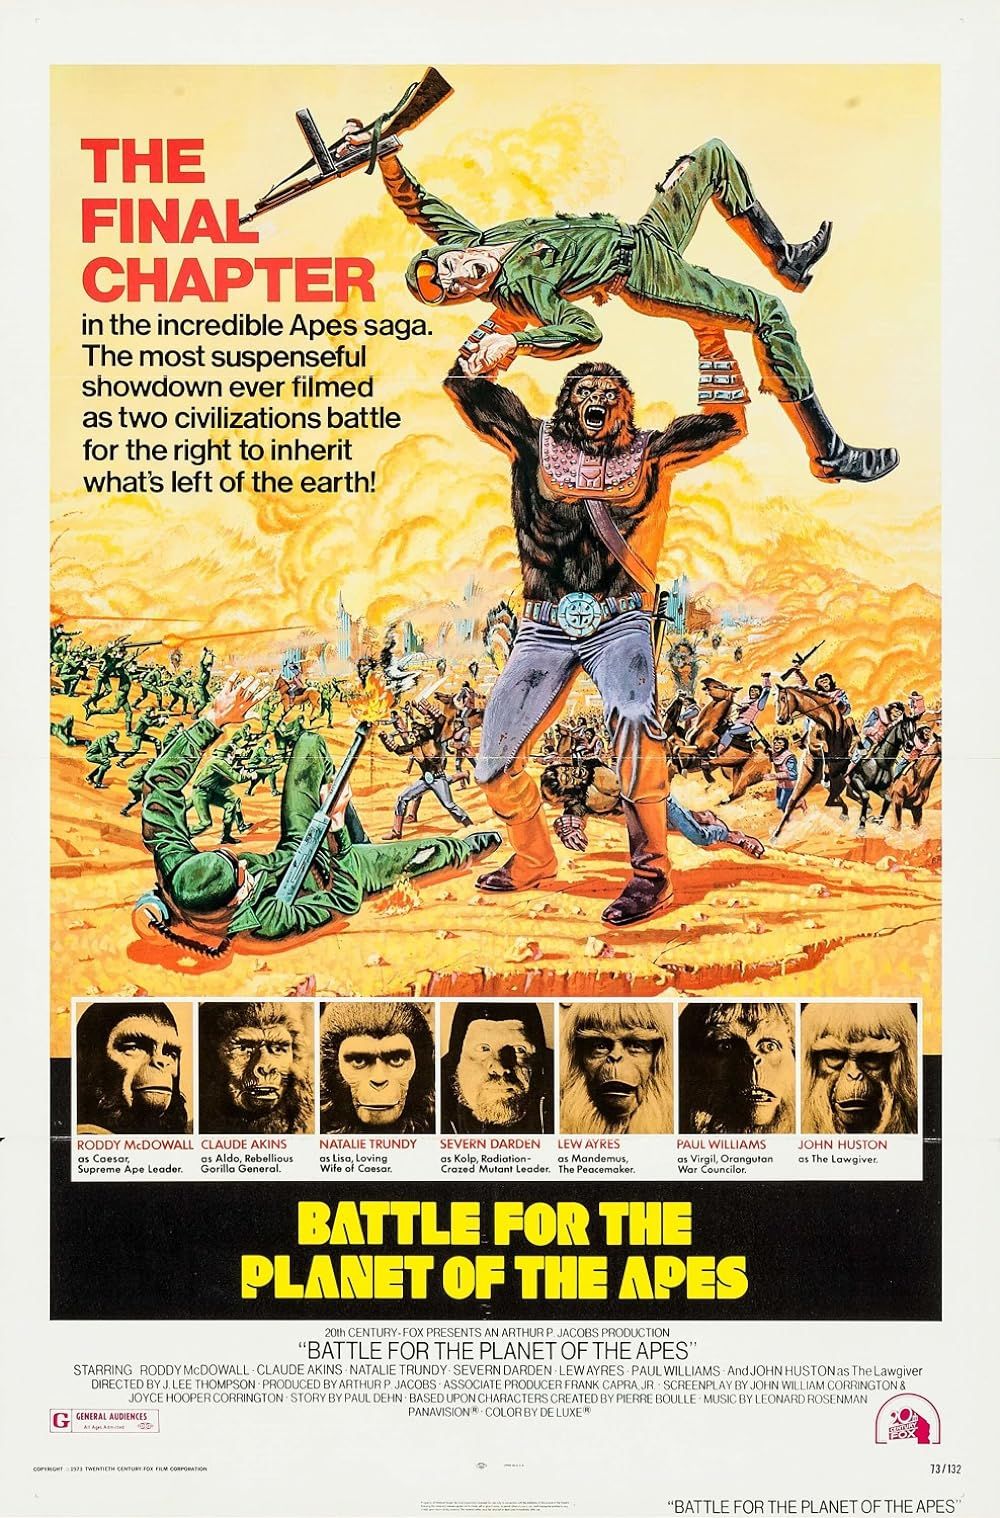 Illustrated Battle For The Planet Of The Apes Official Movie Poster